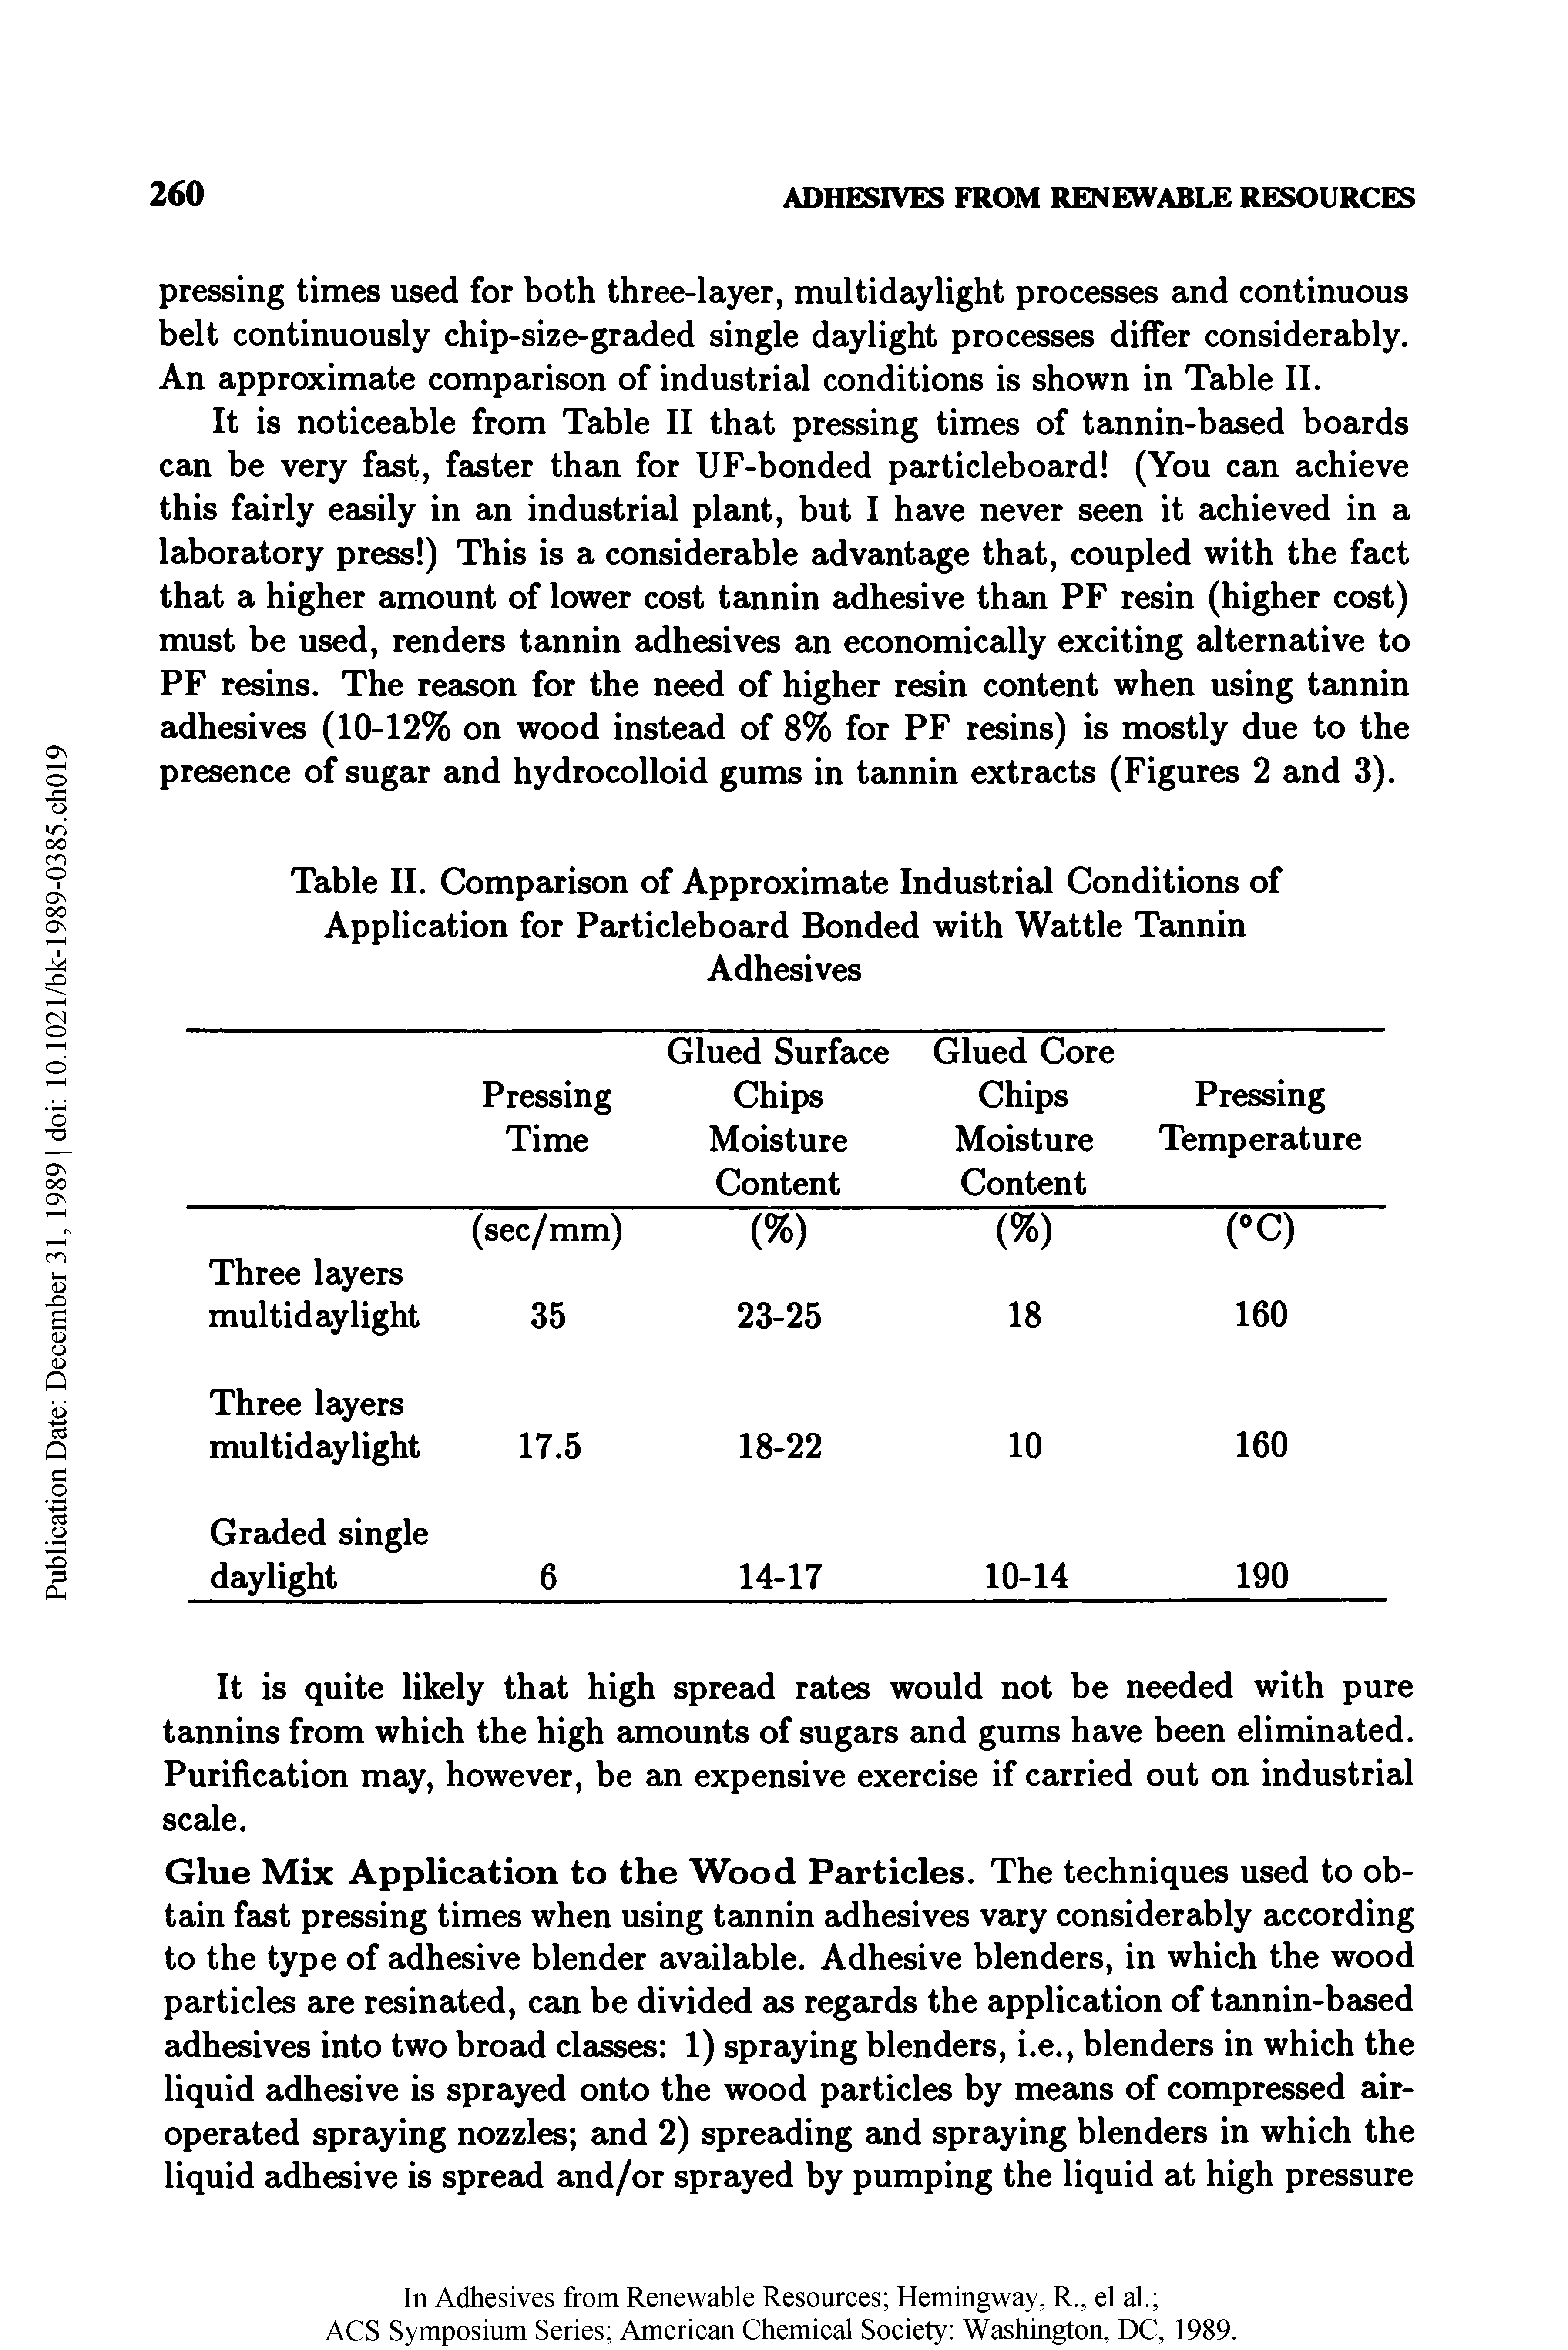 Table II. Comparison of Approximate Industrial Conditions of Application for Particleboard Bonded with Wattle Tannin Adhesives...